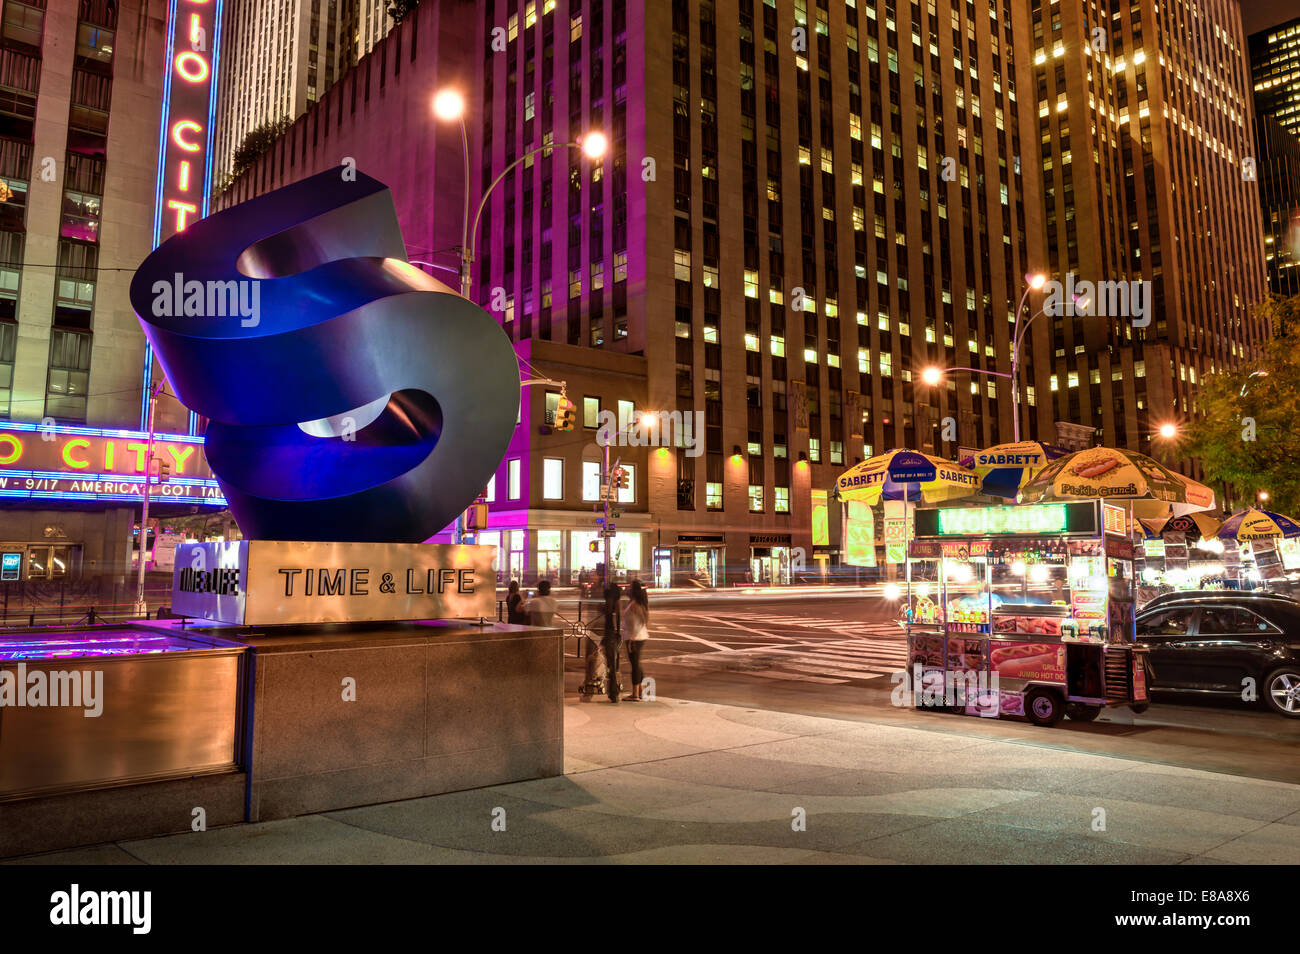 The Time & Life Sculpture in Midtown Manhattan, New York - USA Stock Photo